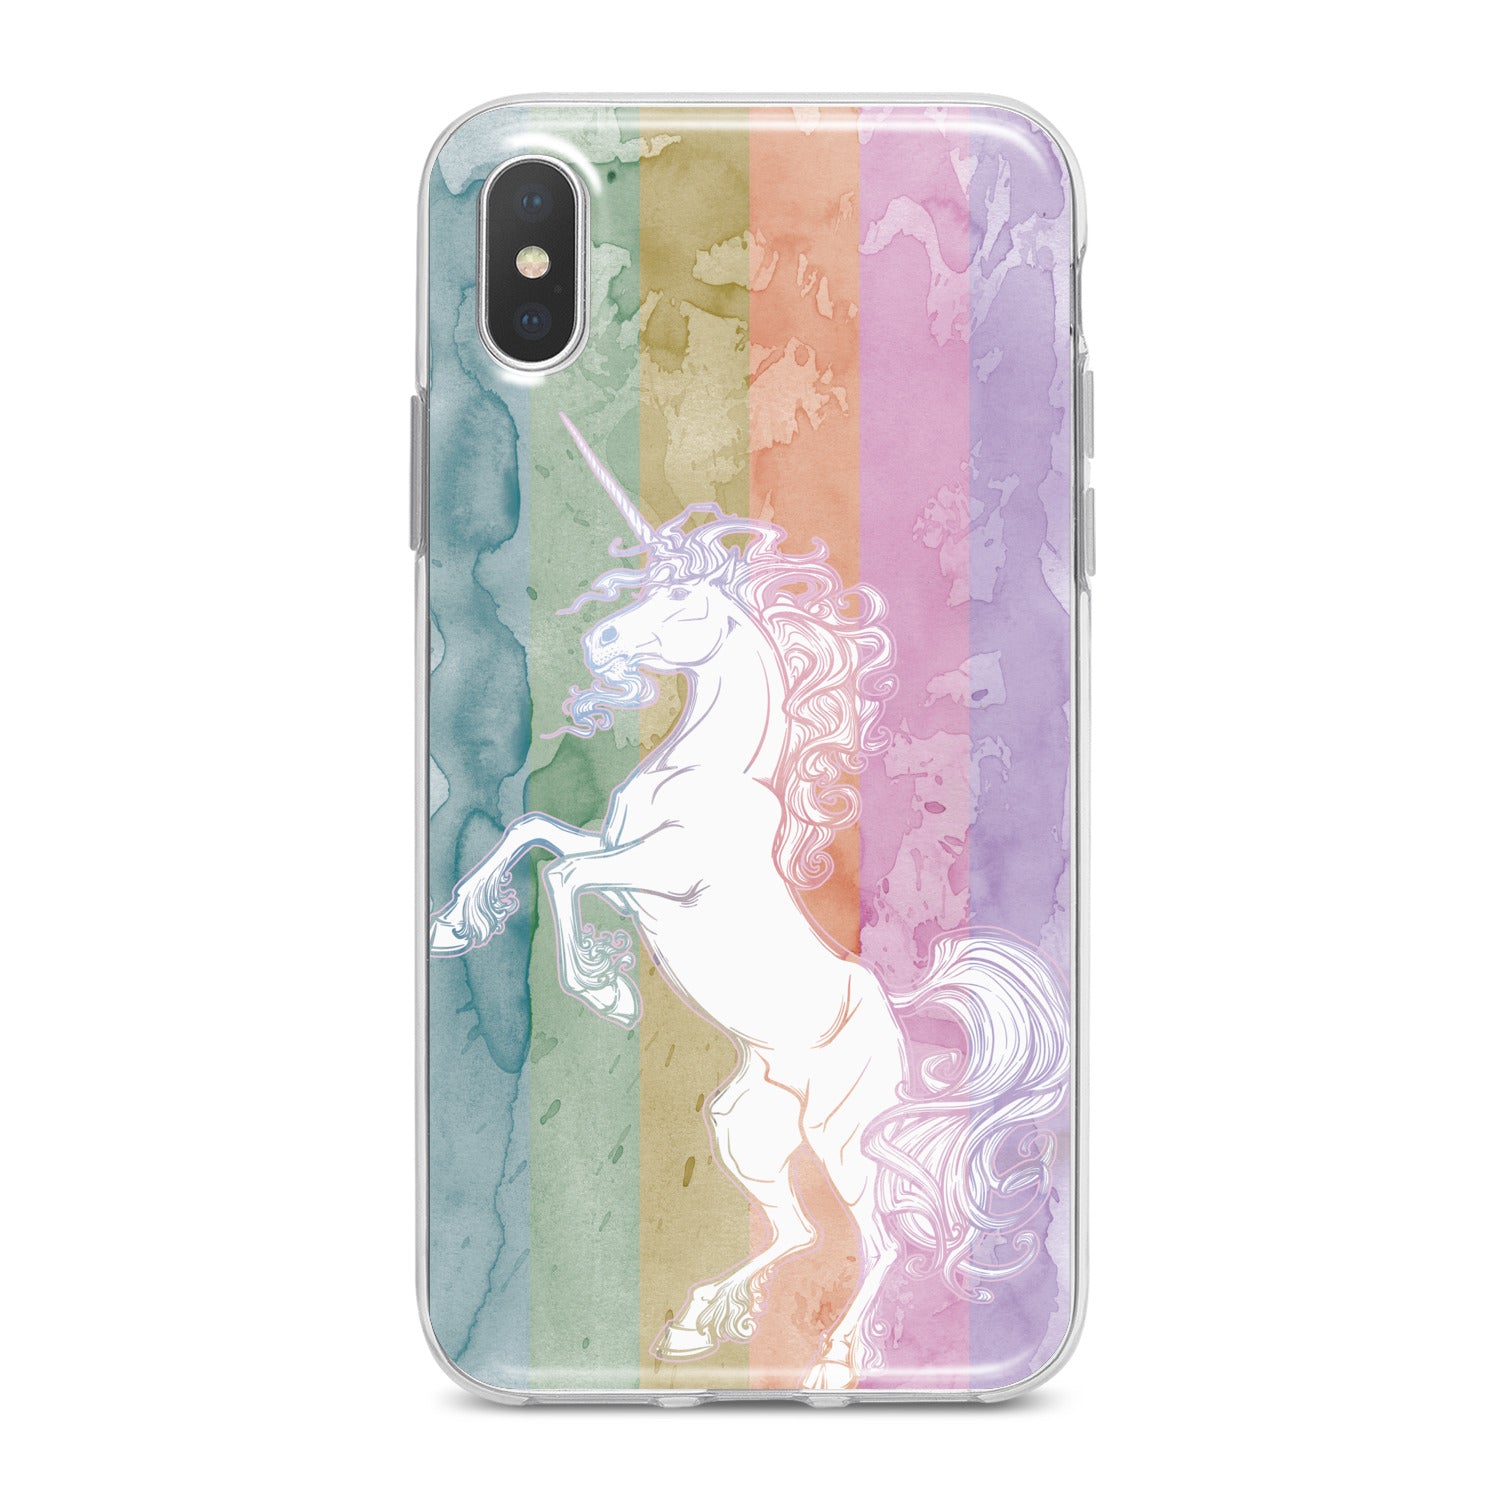 Lex Altern Watercolor Cute Unicorn Phone Case for your iPhone & Android phone.